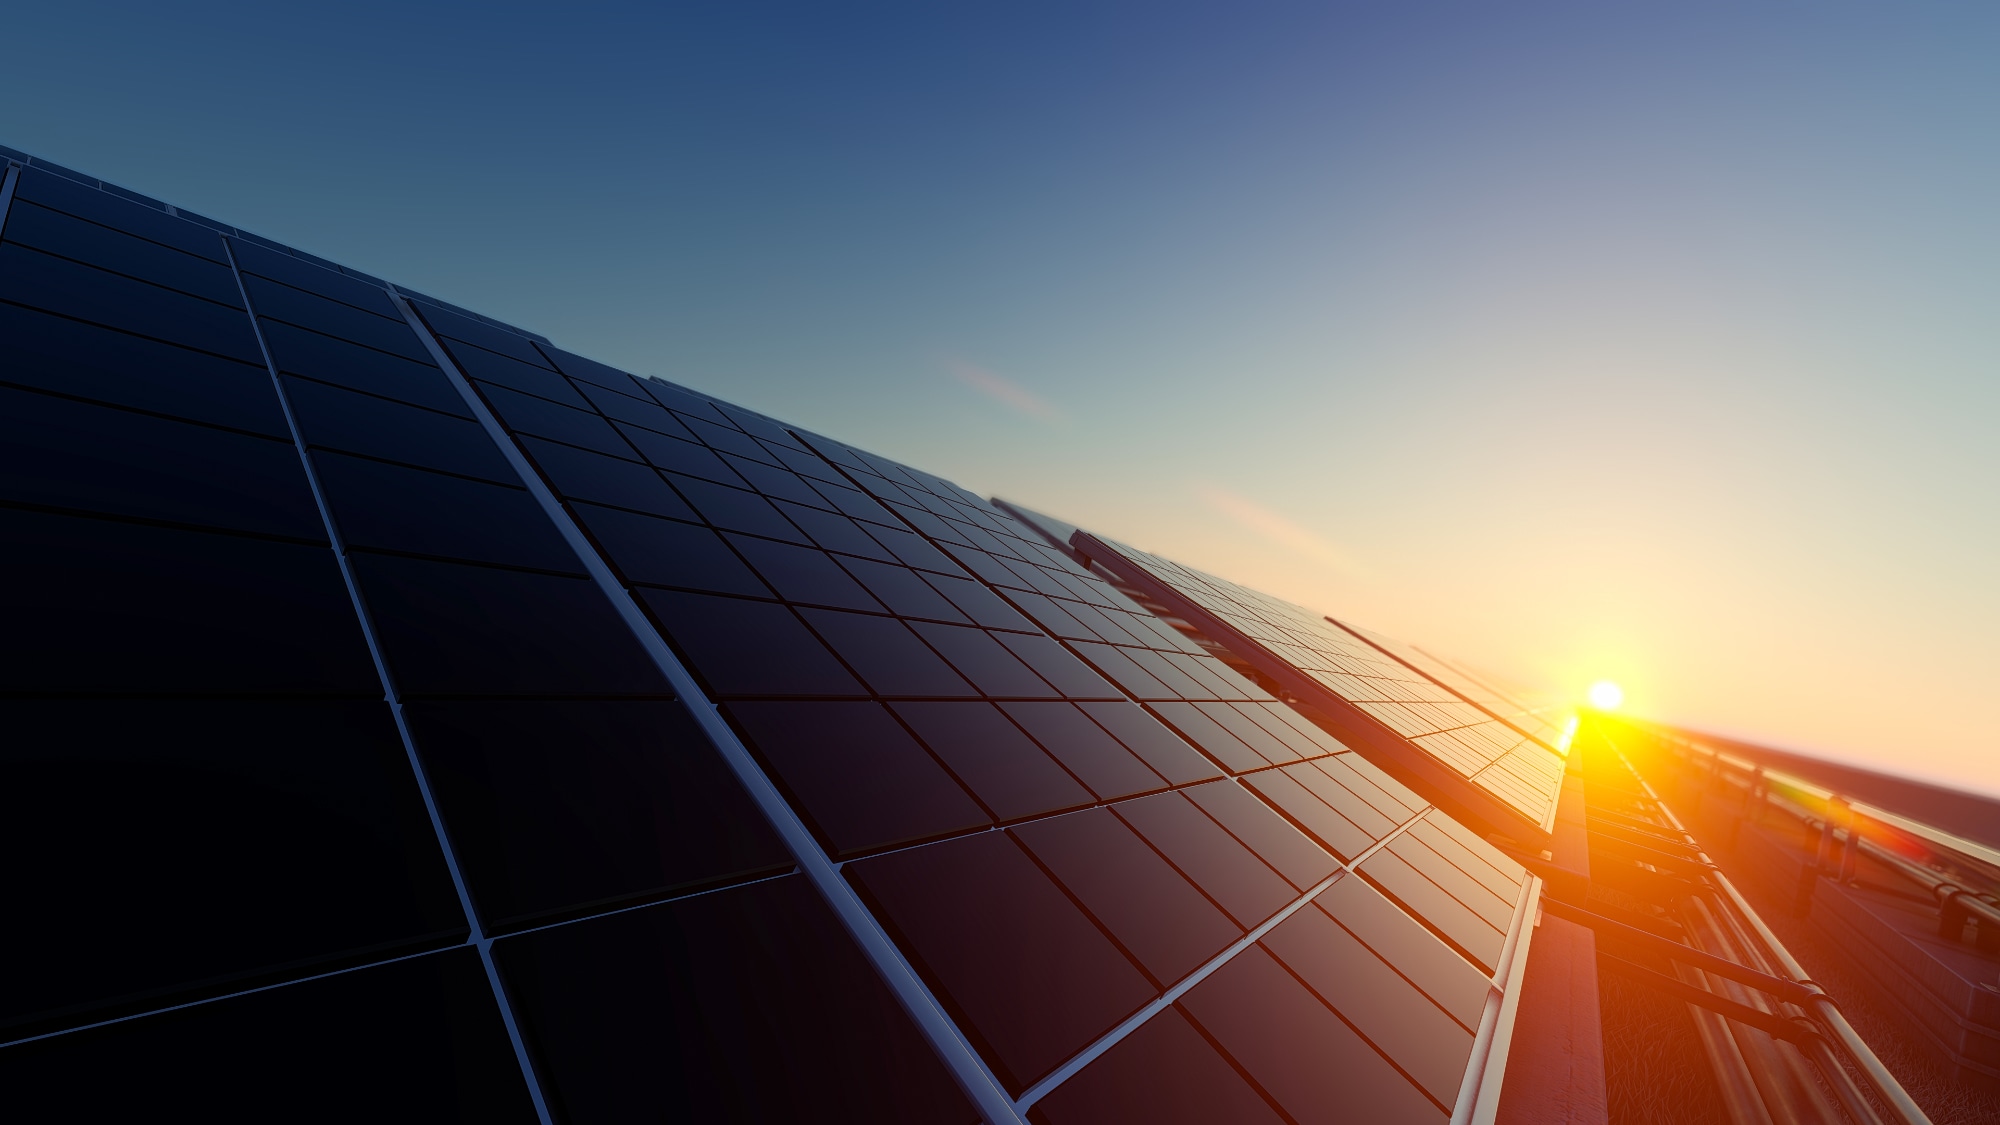 An image showing a setting sun shining down a row of solar panels